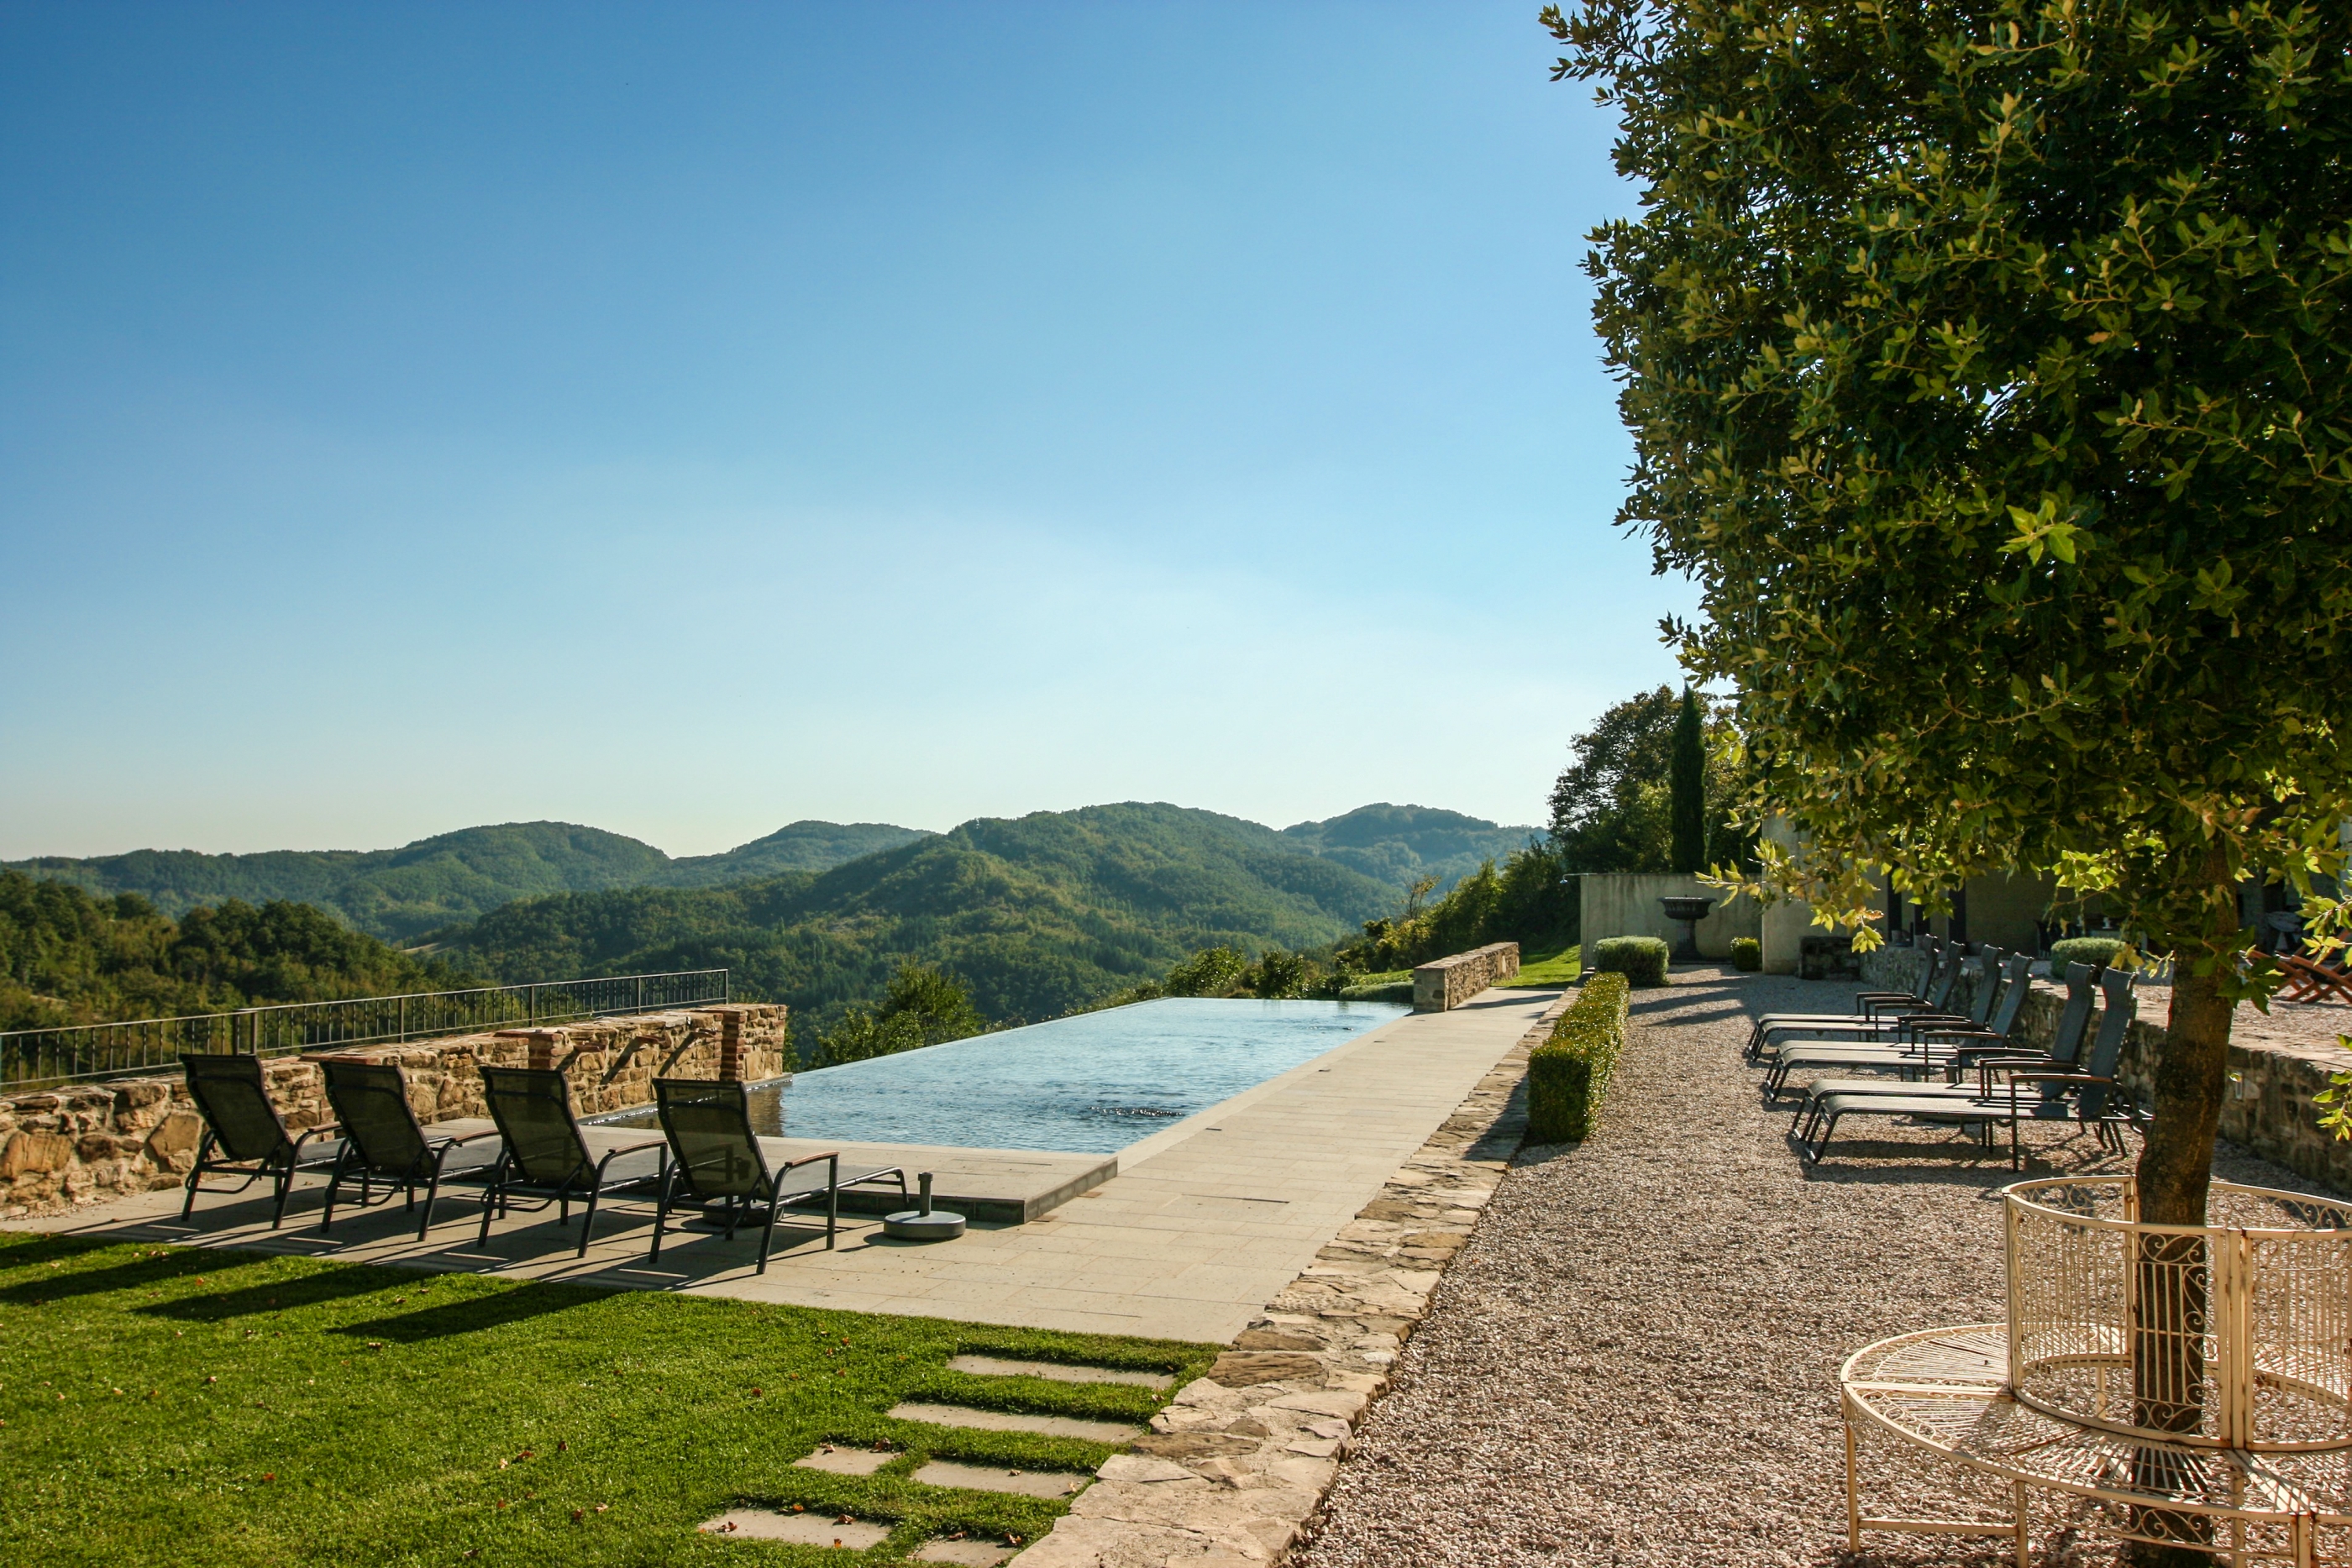 Infinity pool with a view at La Spiga, Umbria